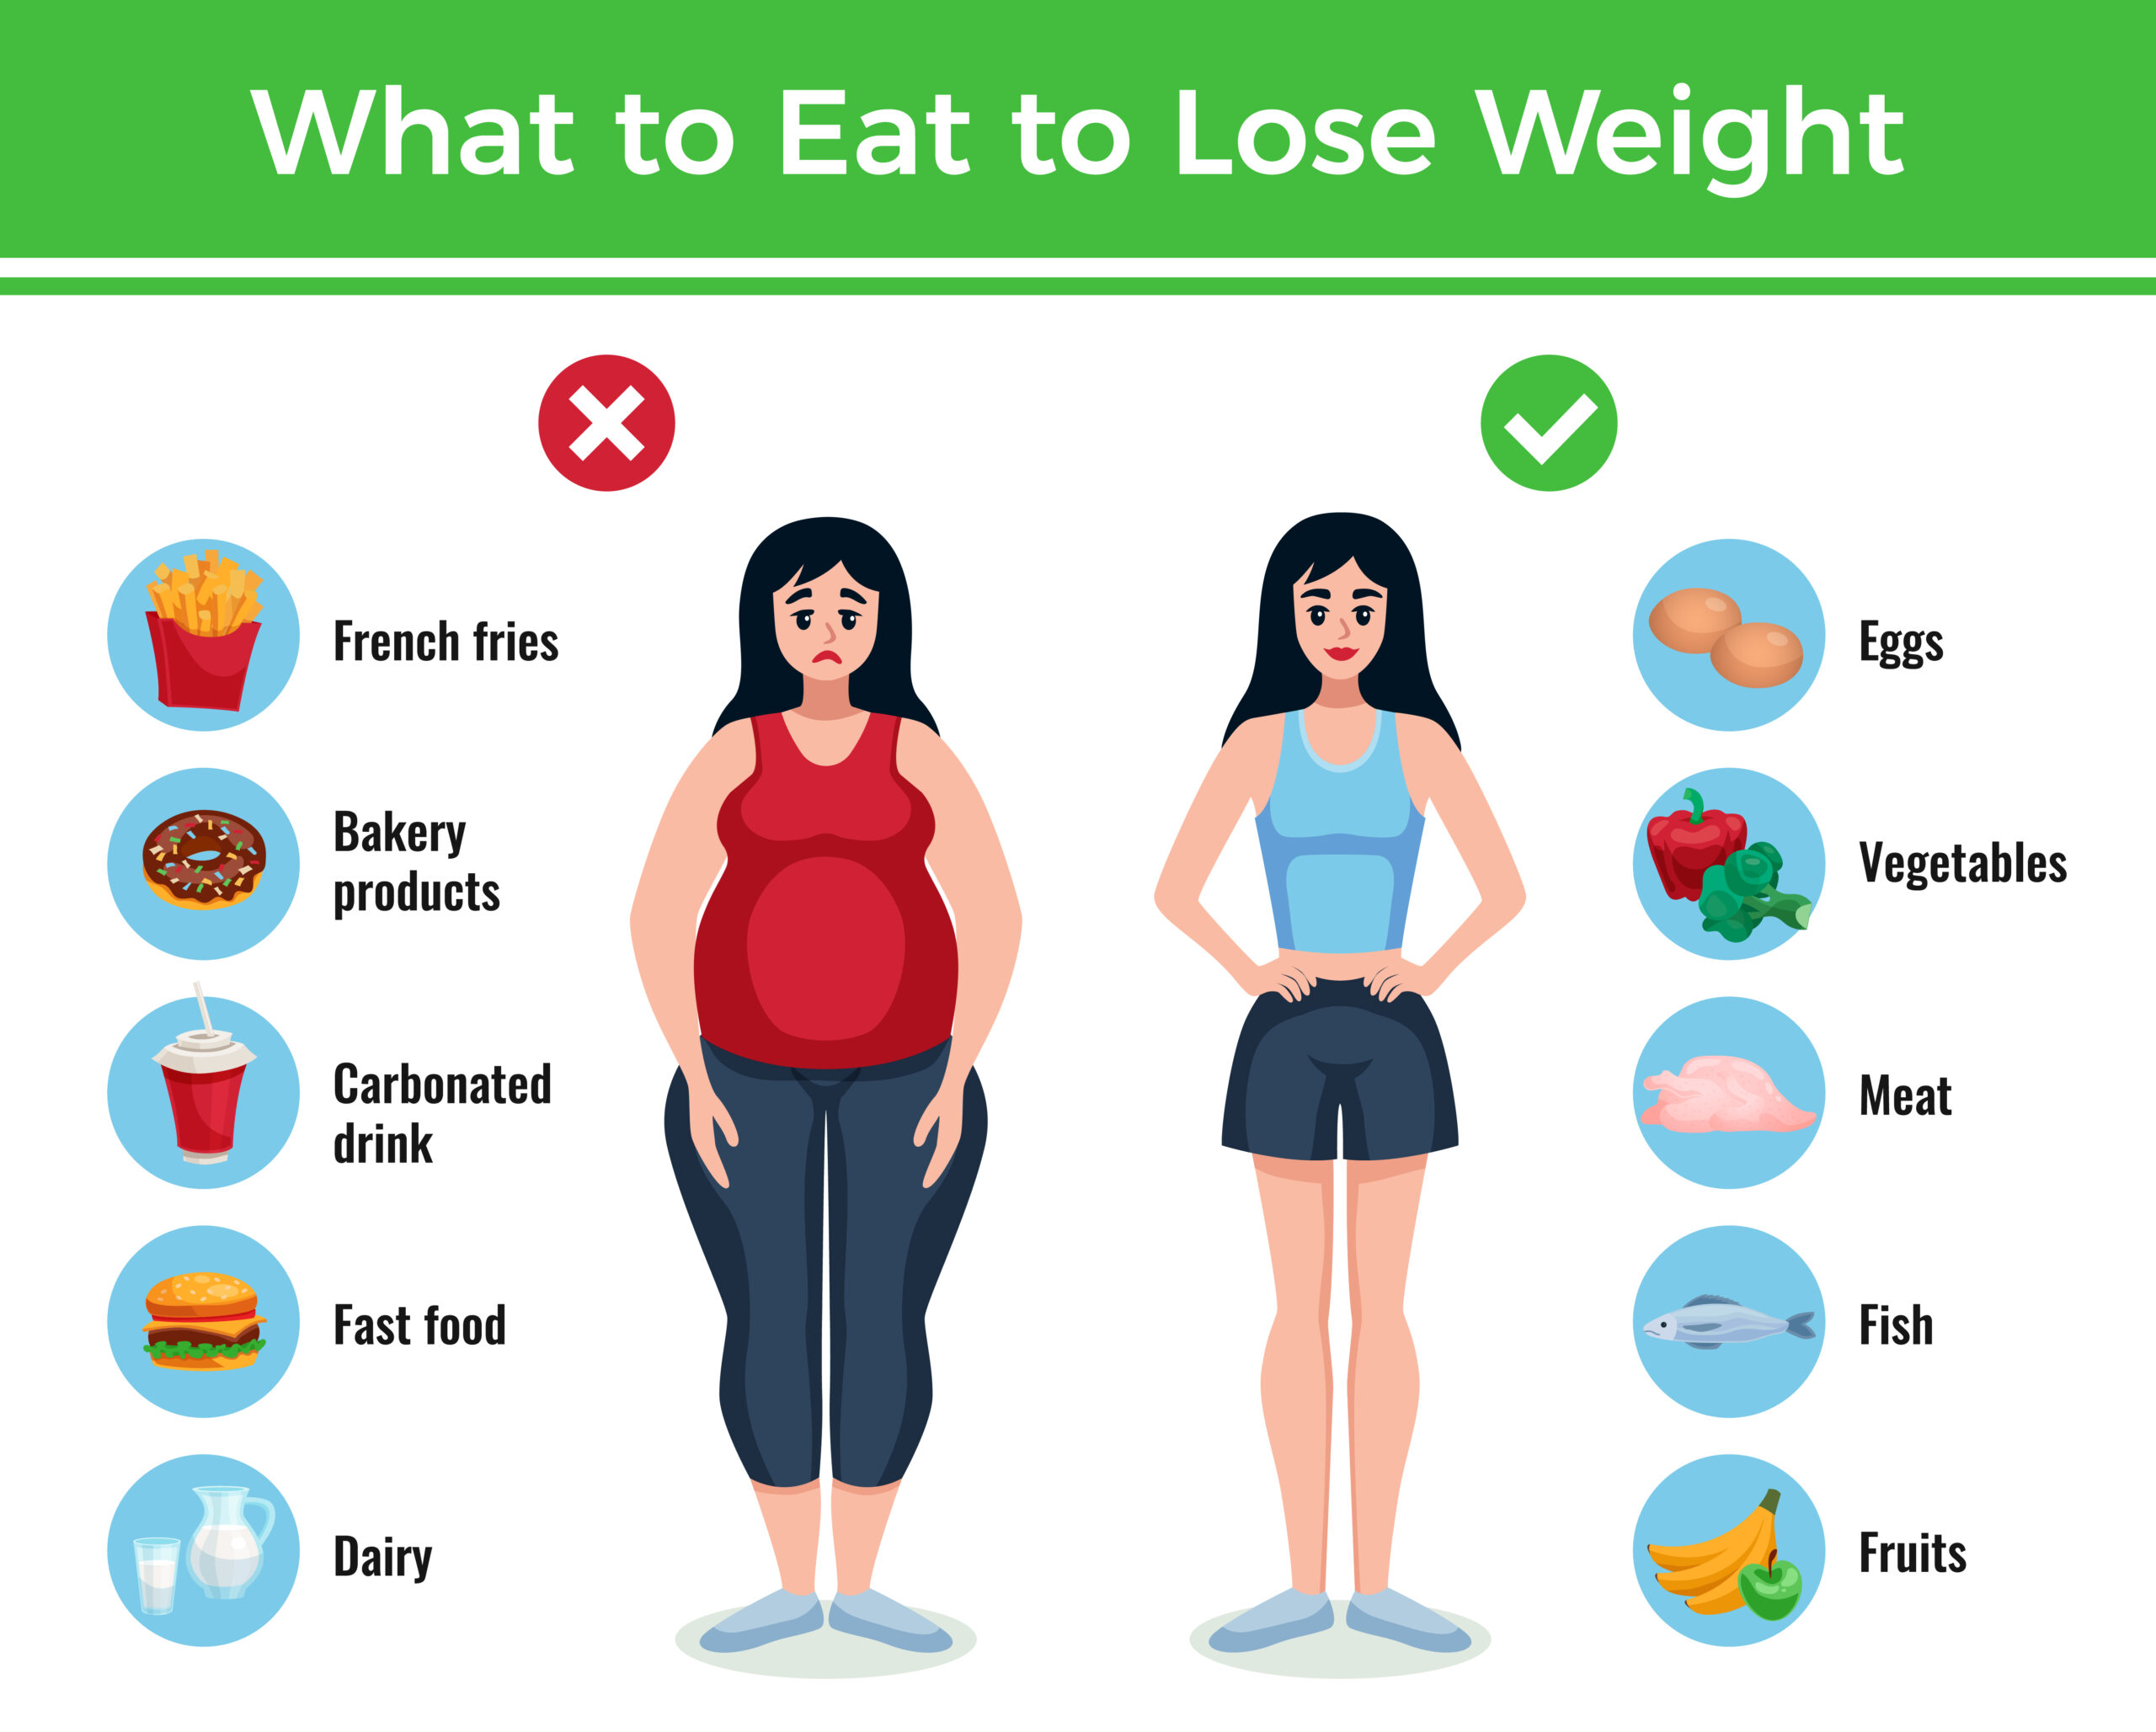 Weight management tips